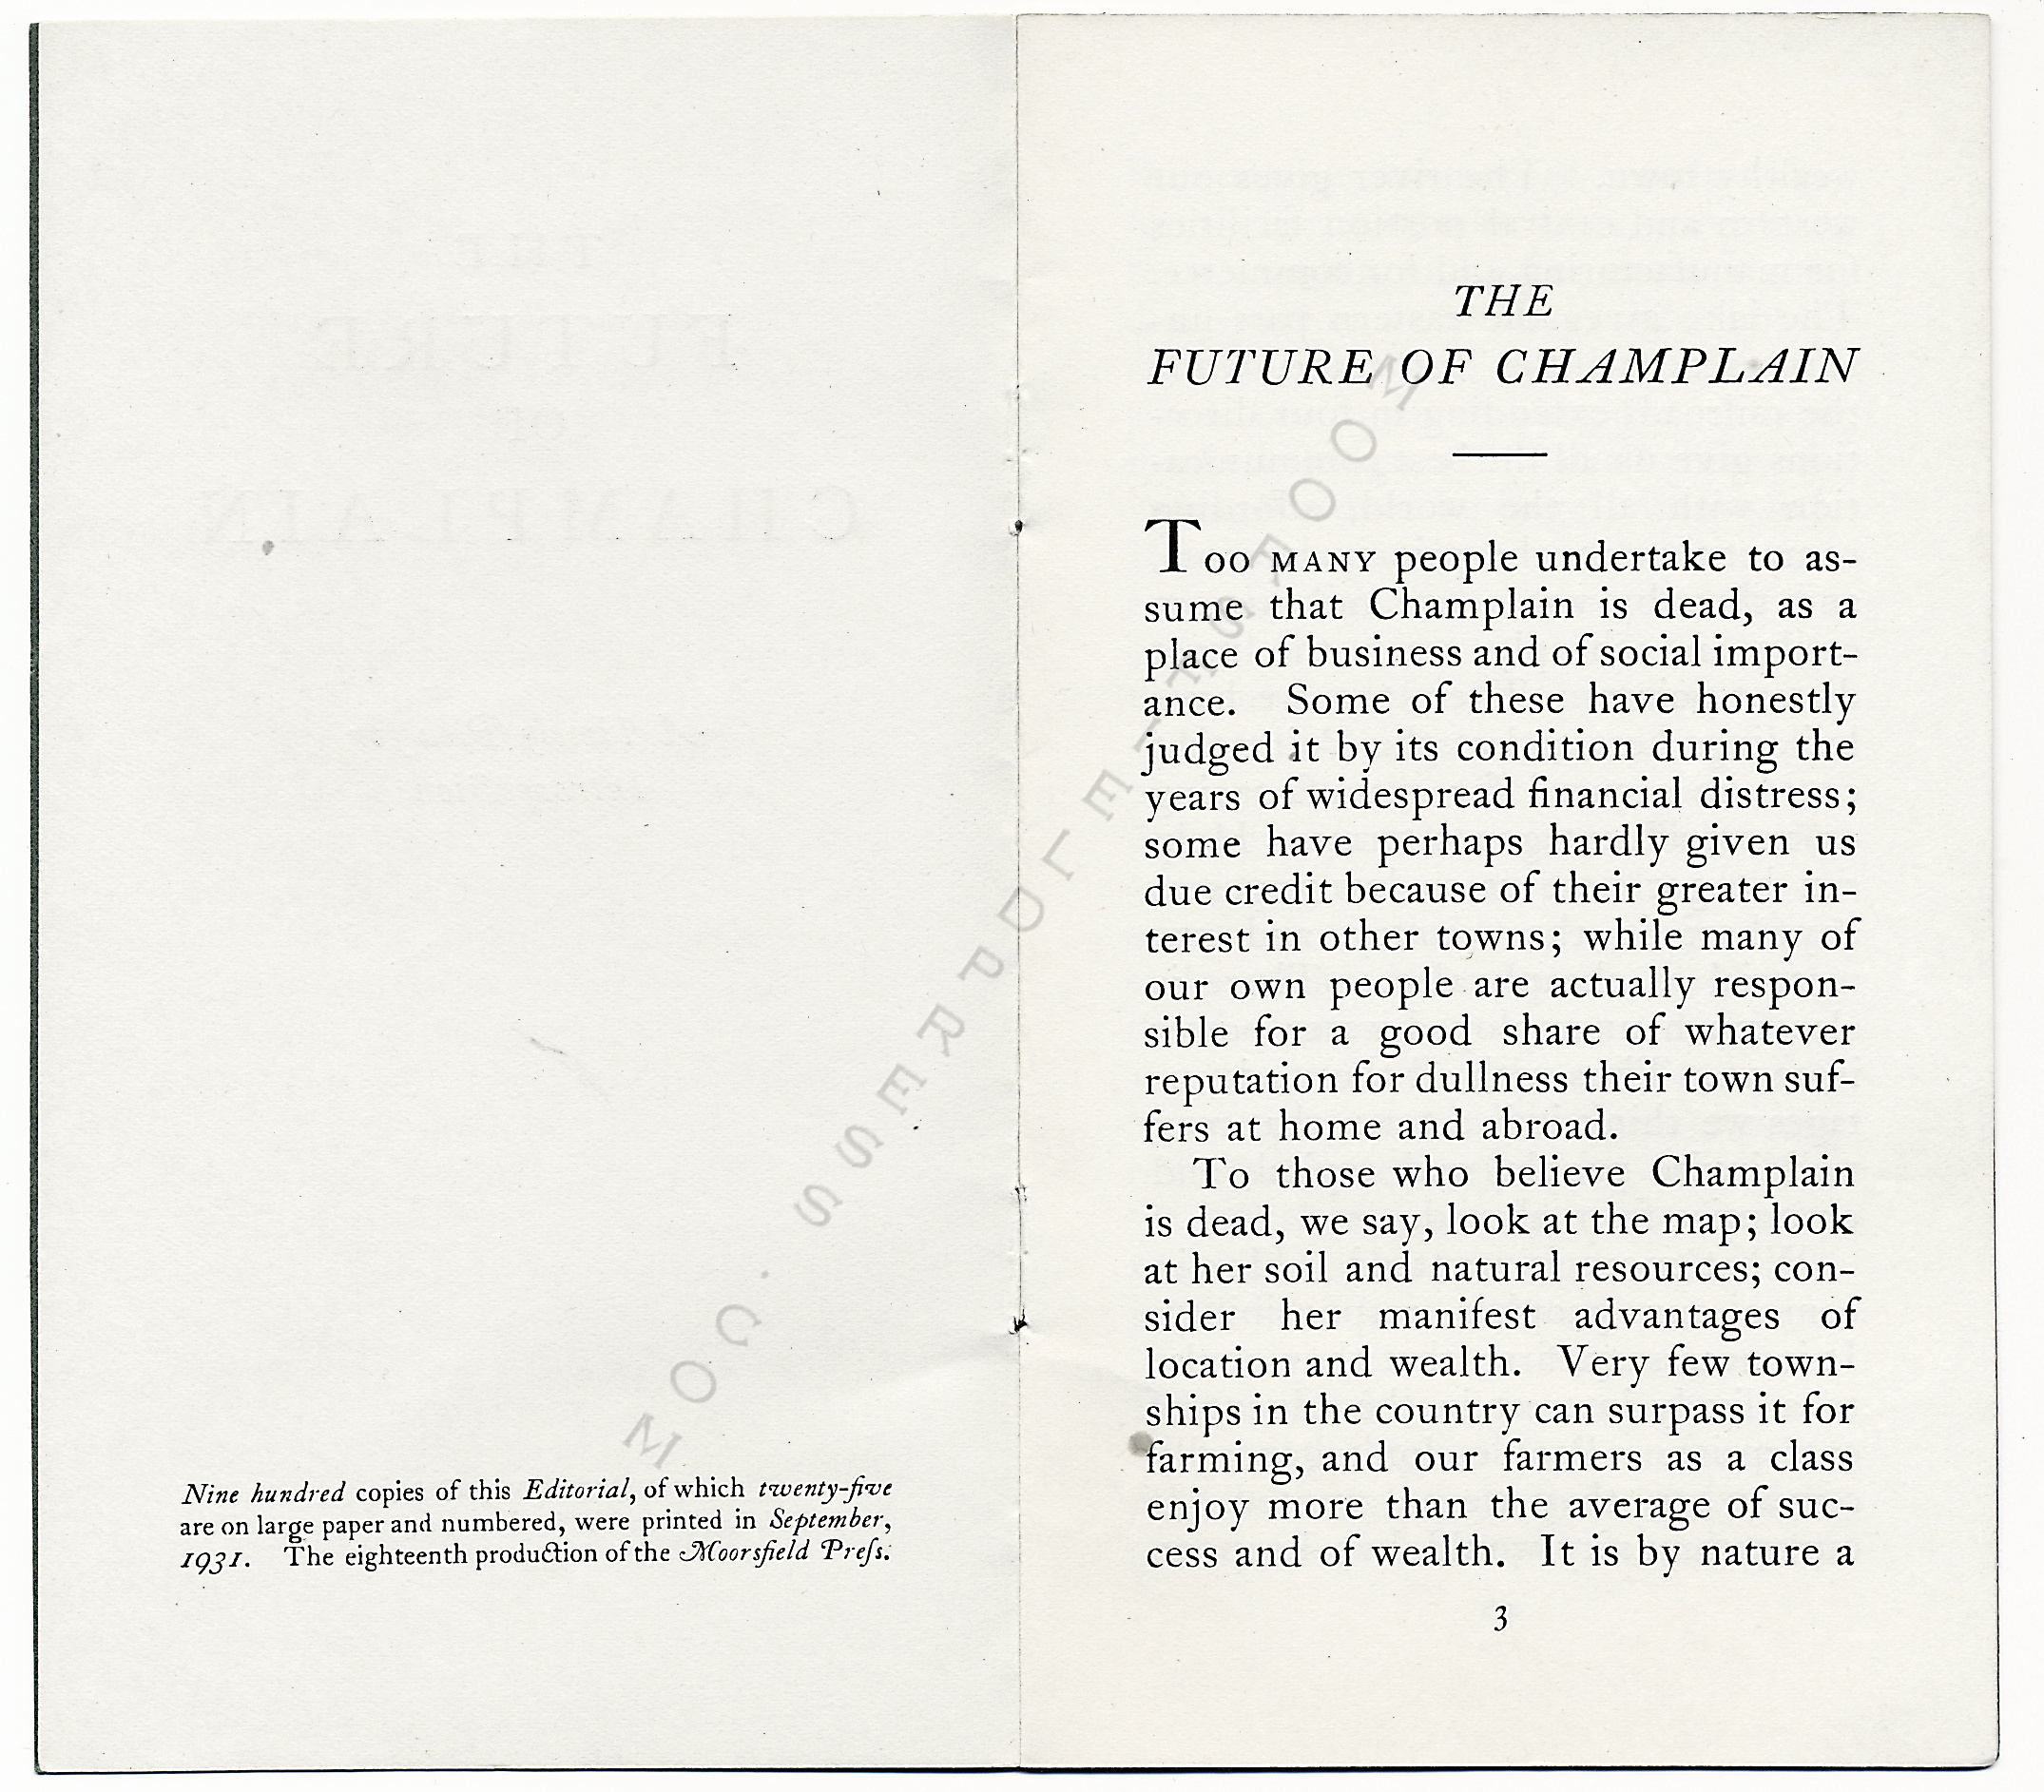 The Future of Champlain by H.M. Mott